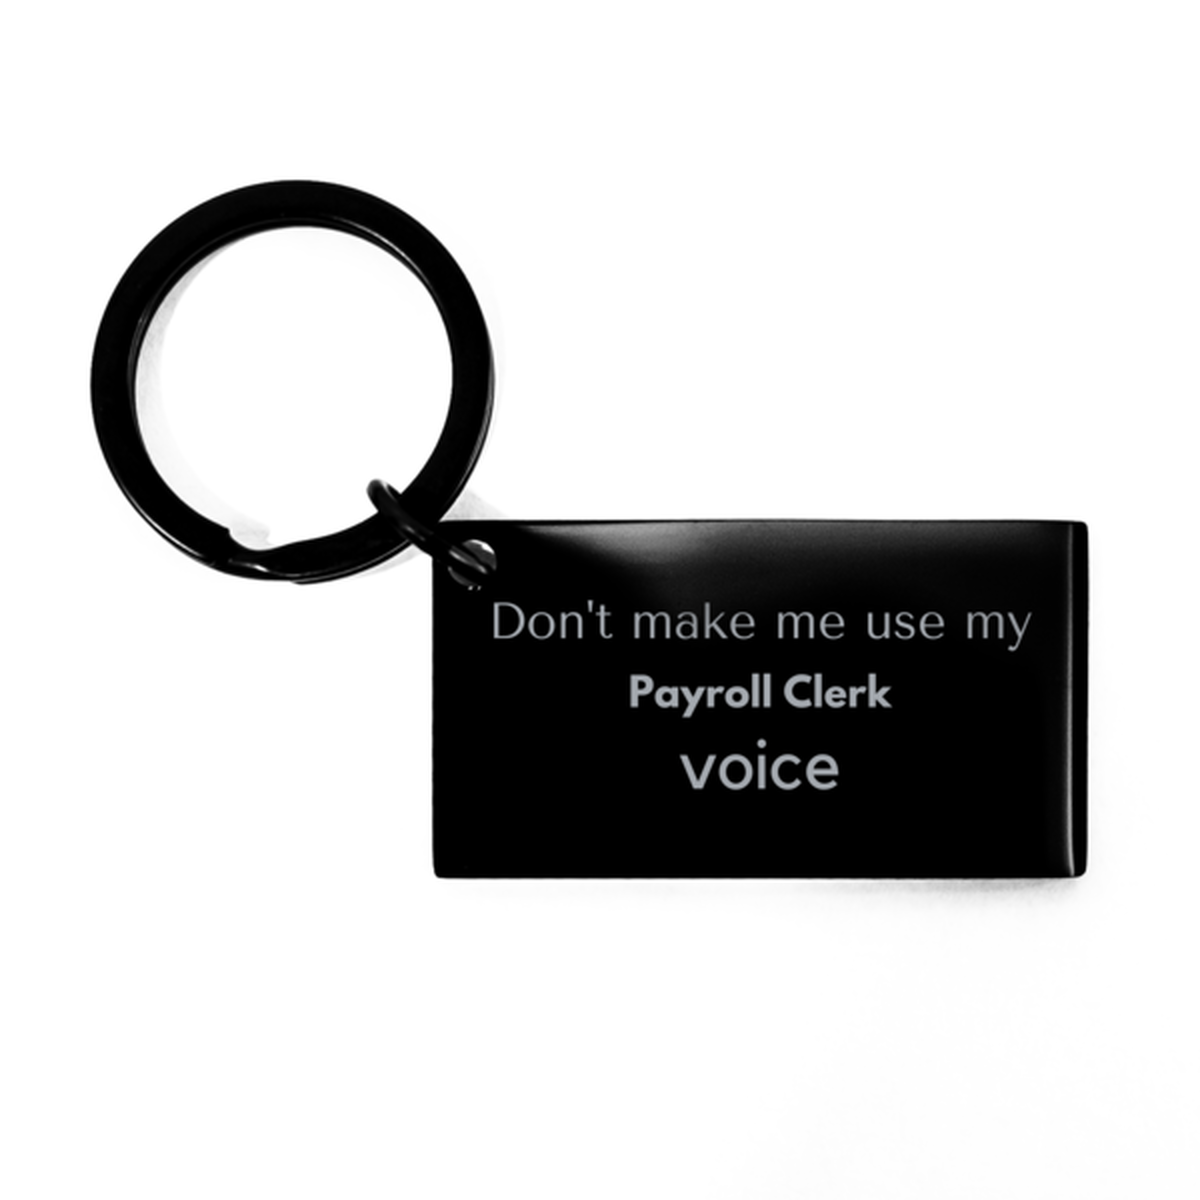 Don't make me use my Payroll Clerk voice, Sarcasm Payroll Clerk Gifts, Christmas Payroll Clerk Keychain Birthday Unique Gifts For Payroll Clerk Coworkers, Men, Women, Colleague, Friends